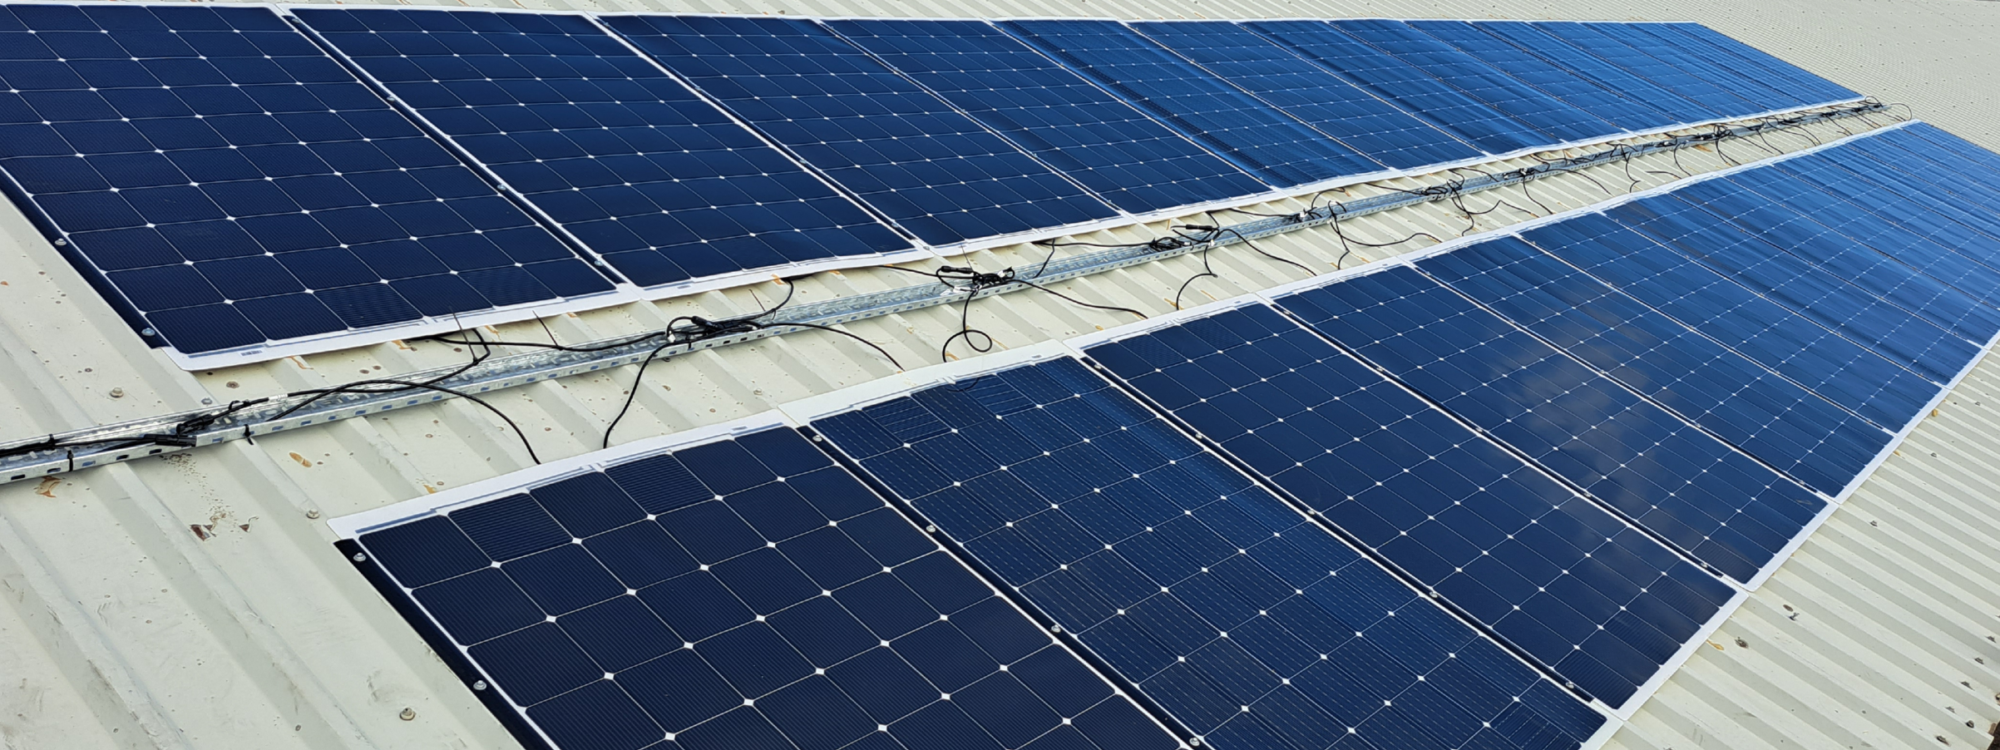 Bradclad bond flexible solar panels to roof using Crestabond structural adhesives